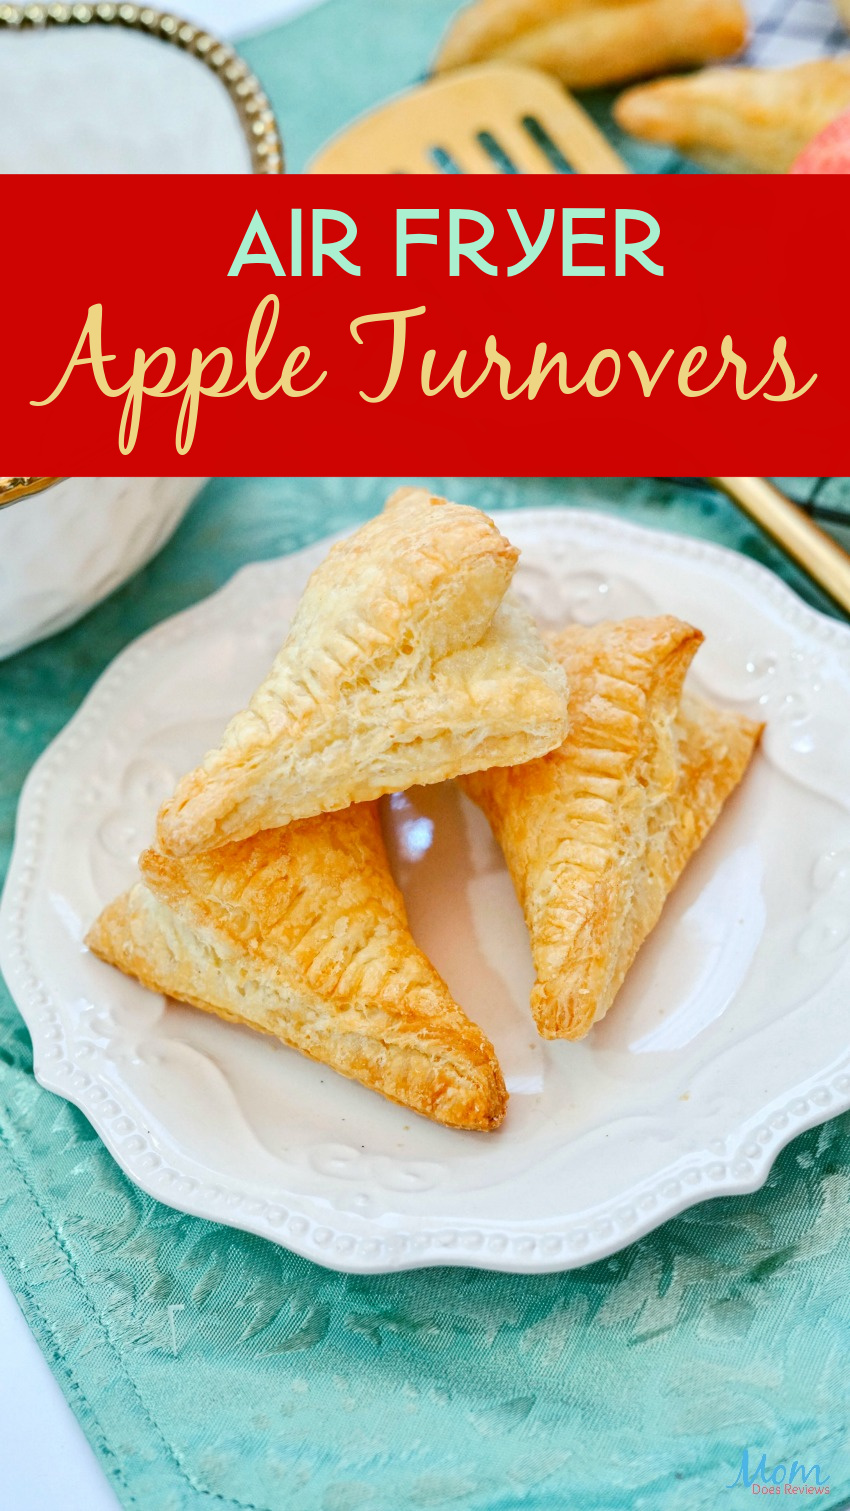 Air Fryer Apple Turnovers Recipe #desserts #sweets #applerecipes